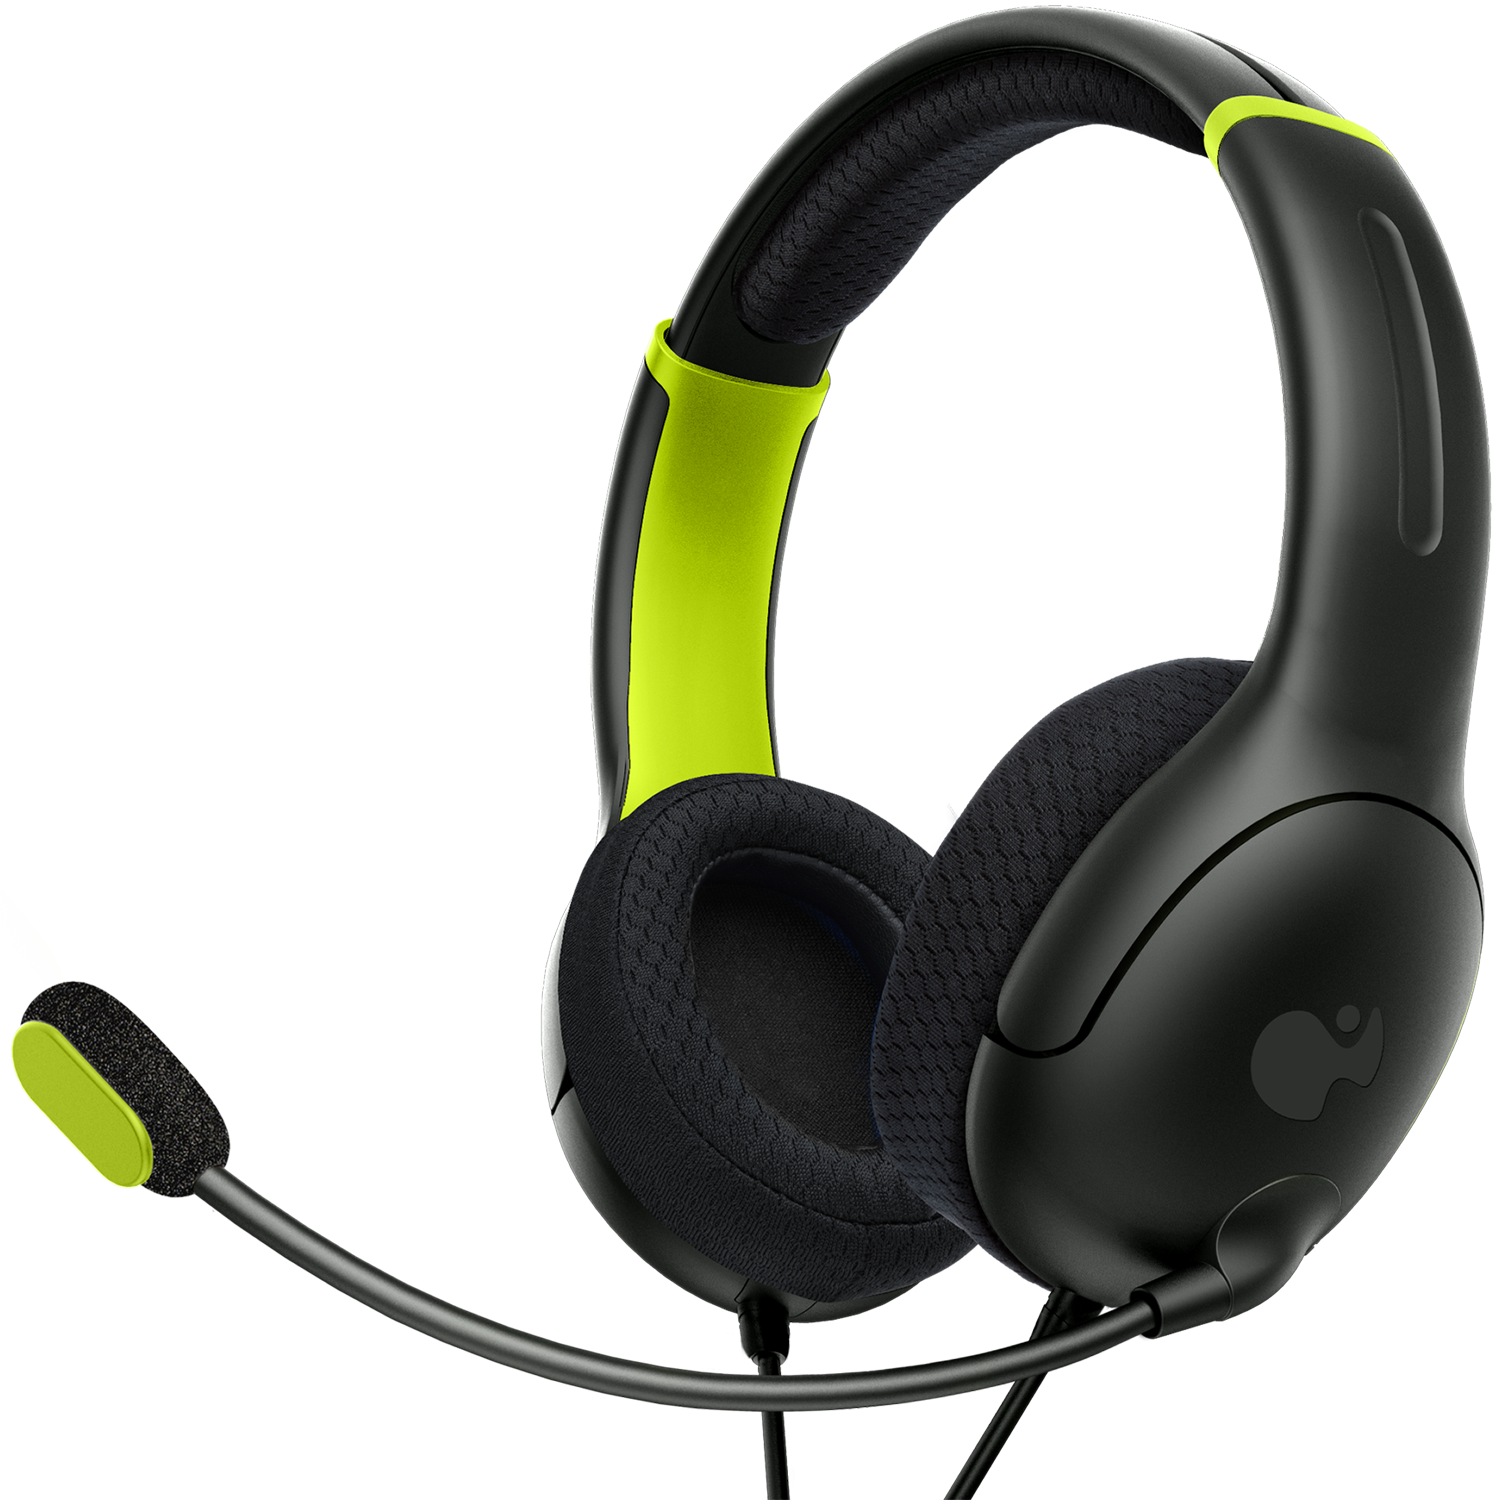 PDP XB One LVL40 Wired Stereo Headset Xbox One - Black/Green